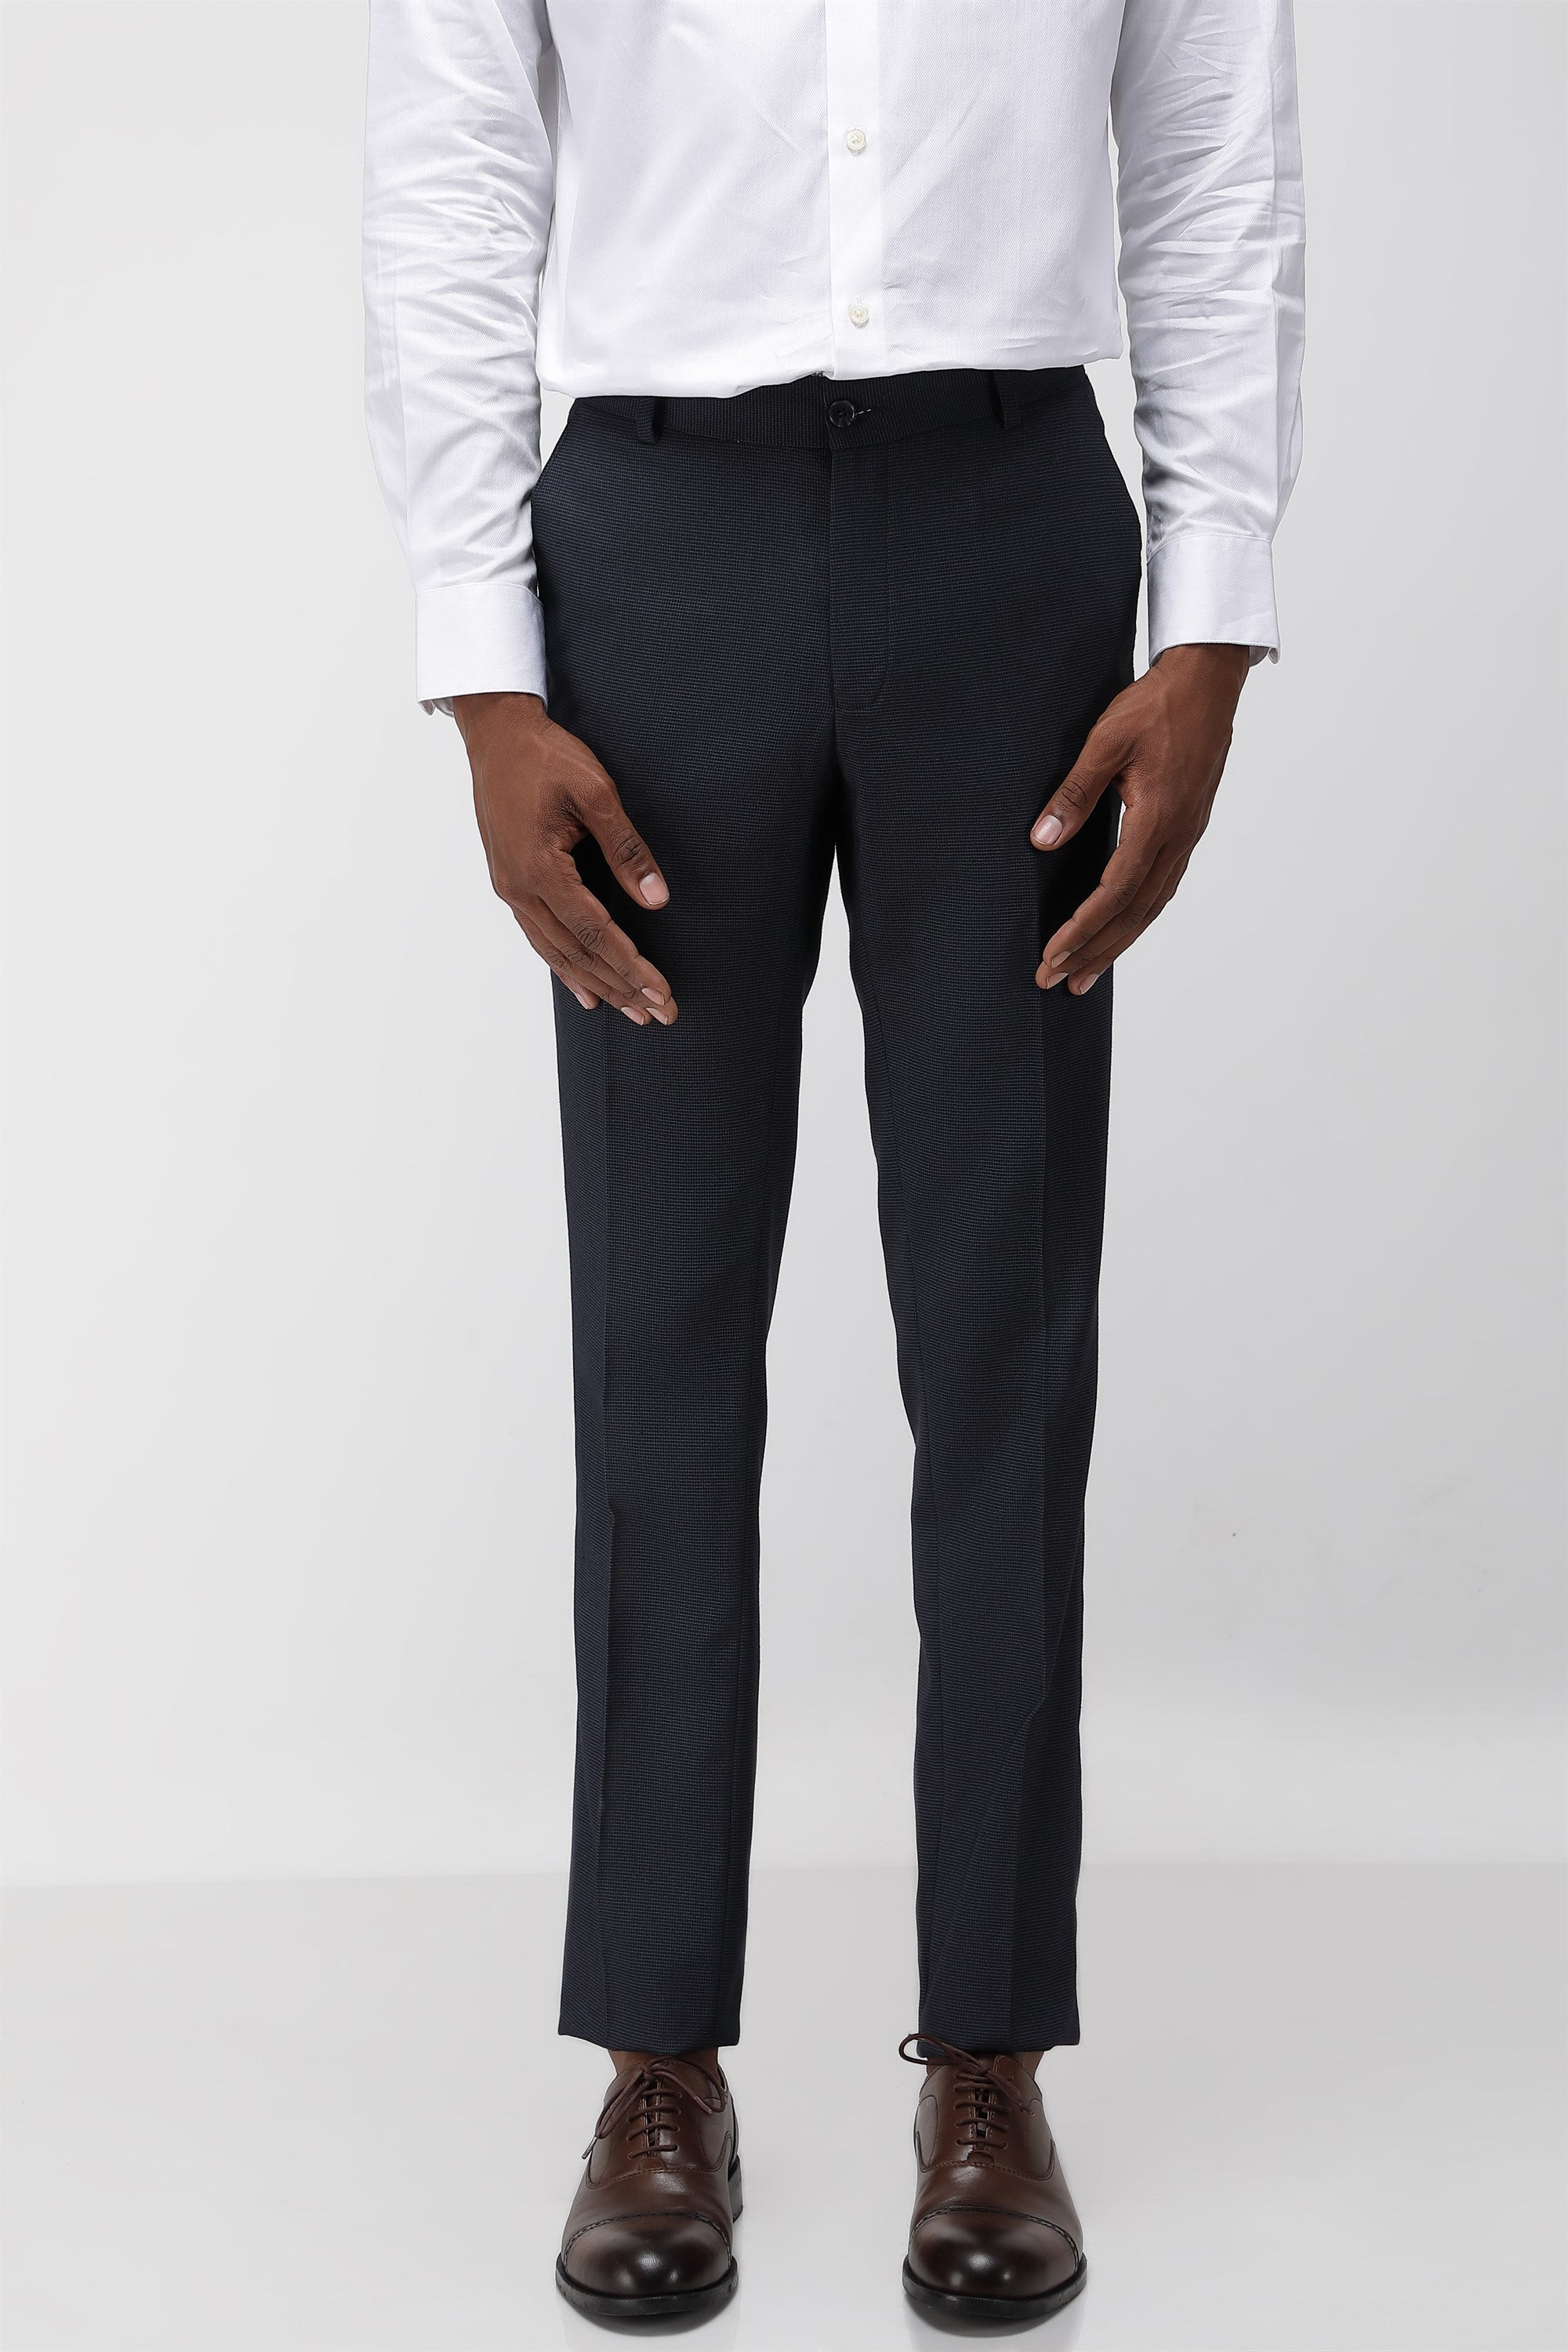 T the brand Stretch Formal Micro Dobby Trouser - Navy Blue